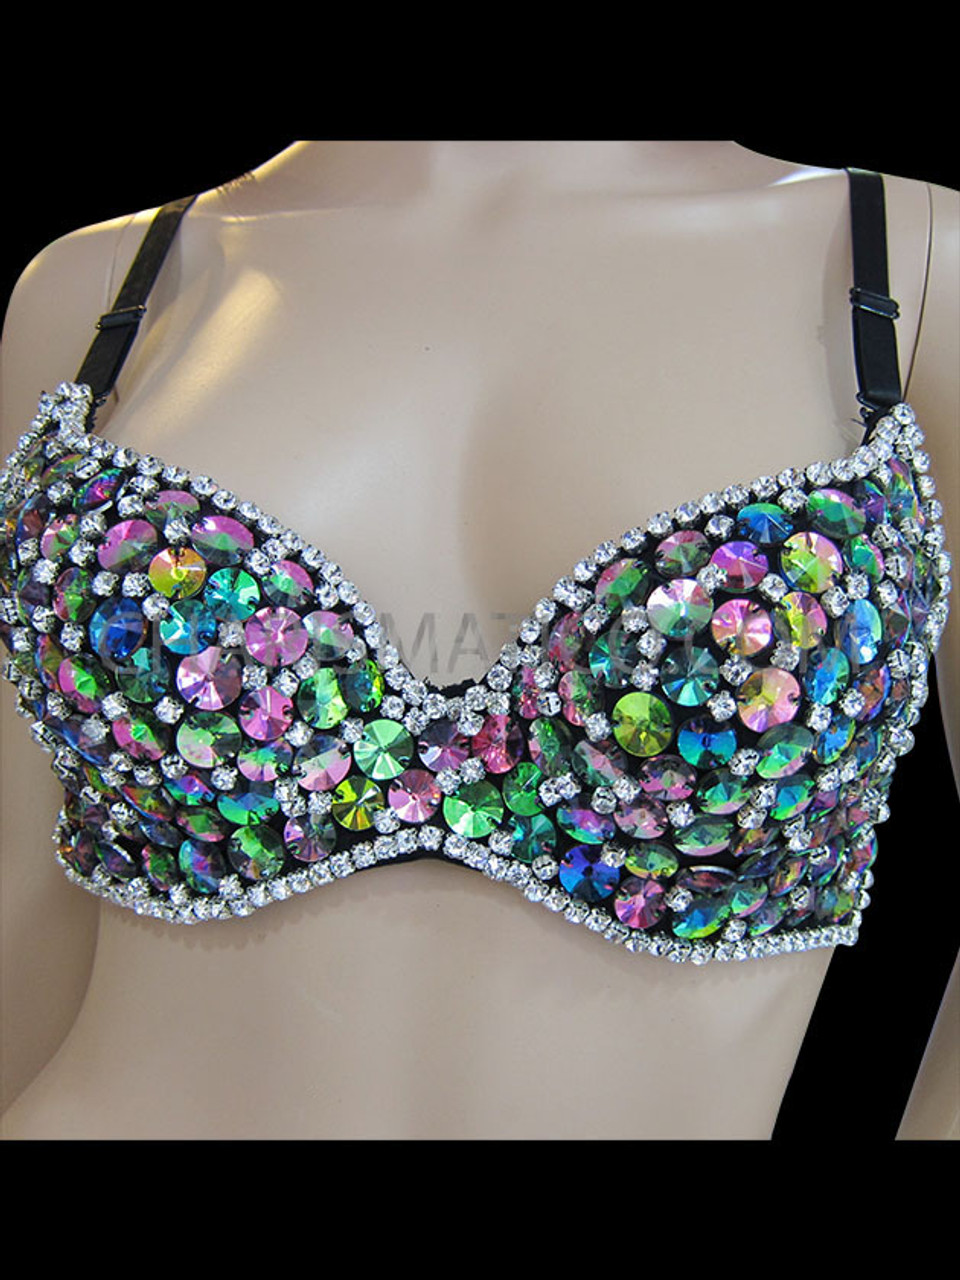 Iridescent Green Crystal Beaded Bra With Rhinestone Accents